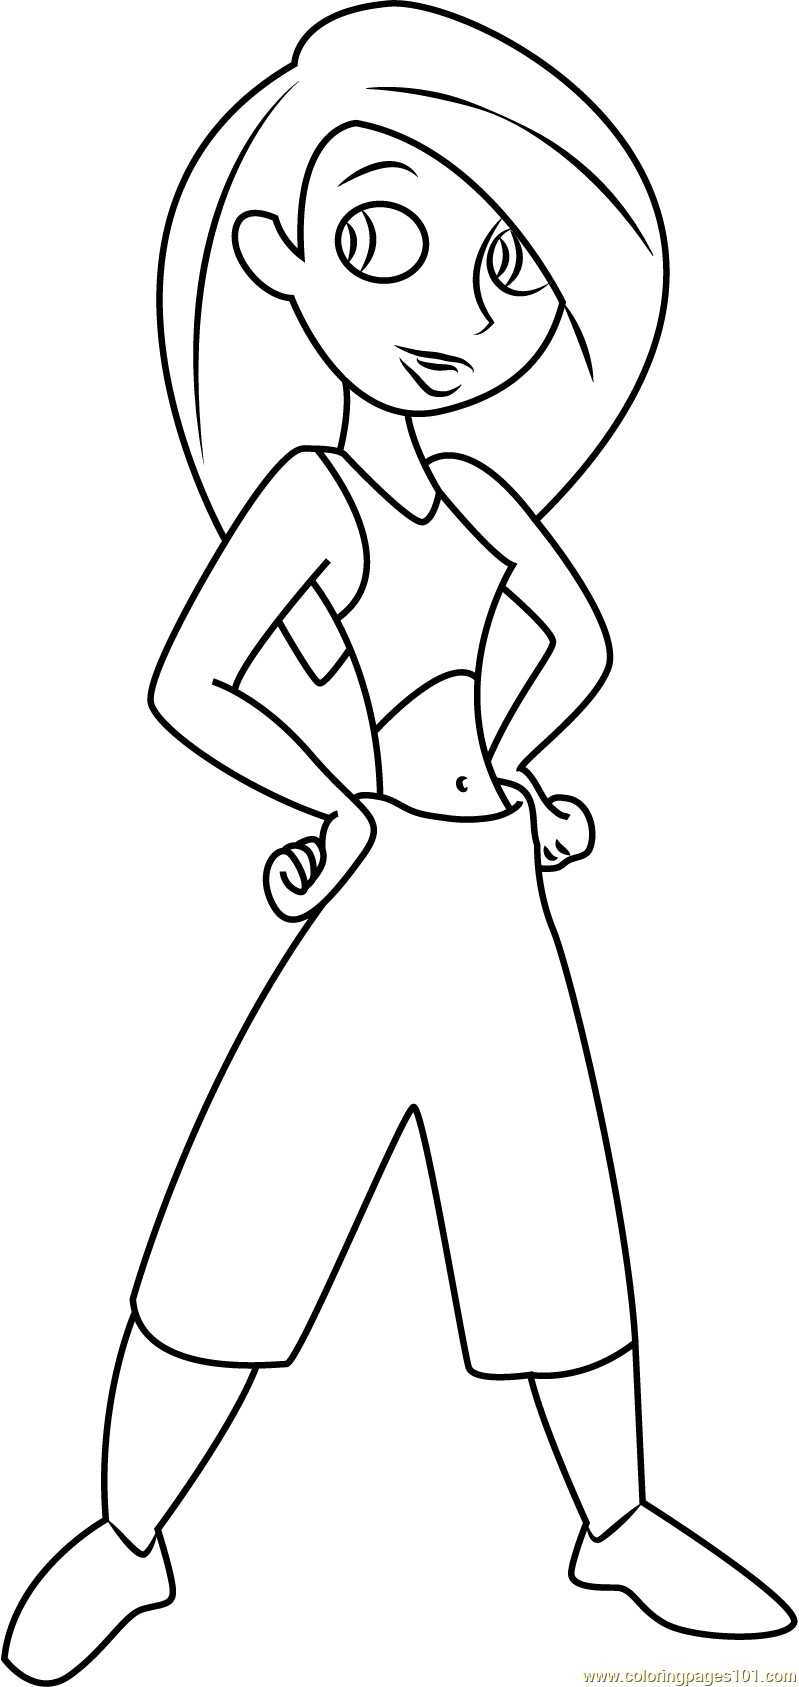 Kim Possible Coloring Pages
 Charming Kim Possible Coloring Page Free Kim Possible